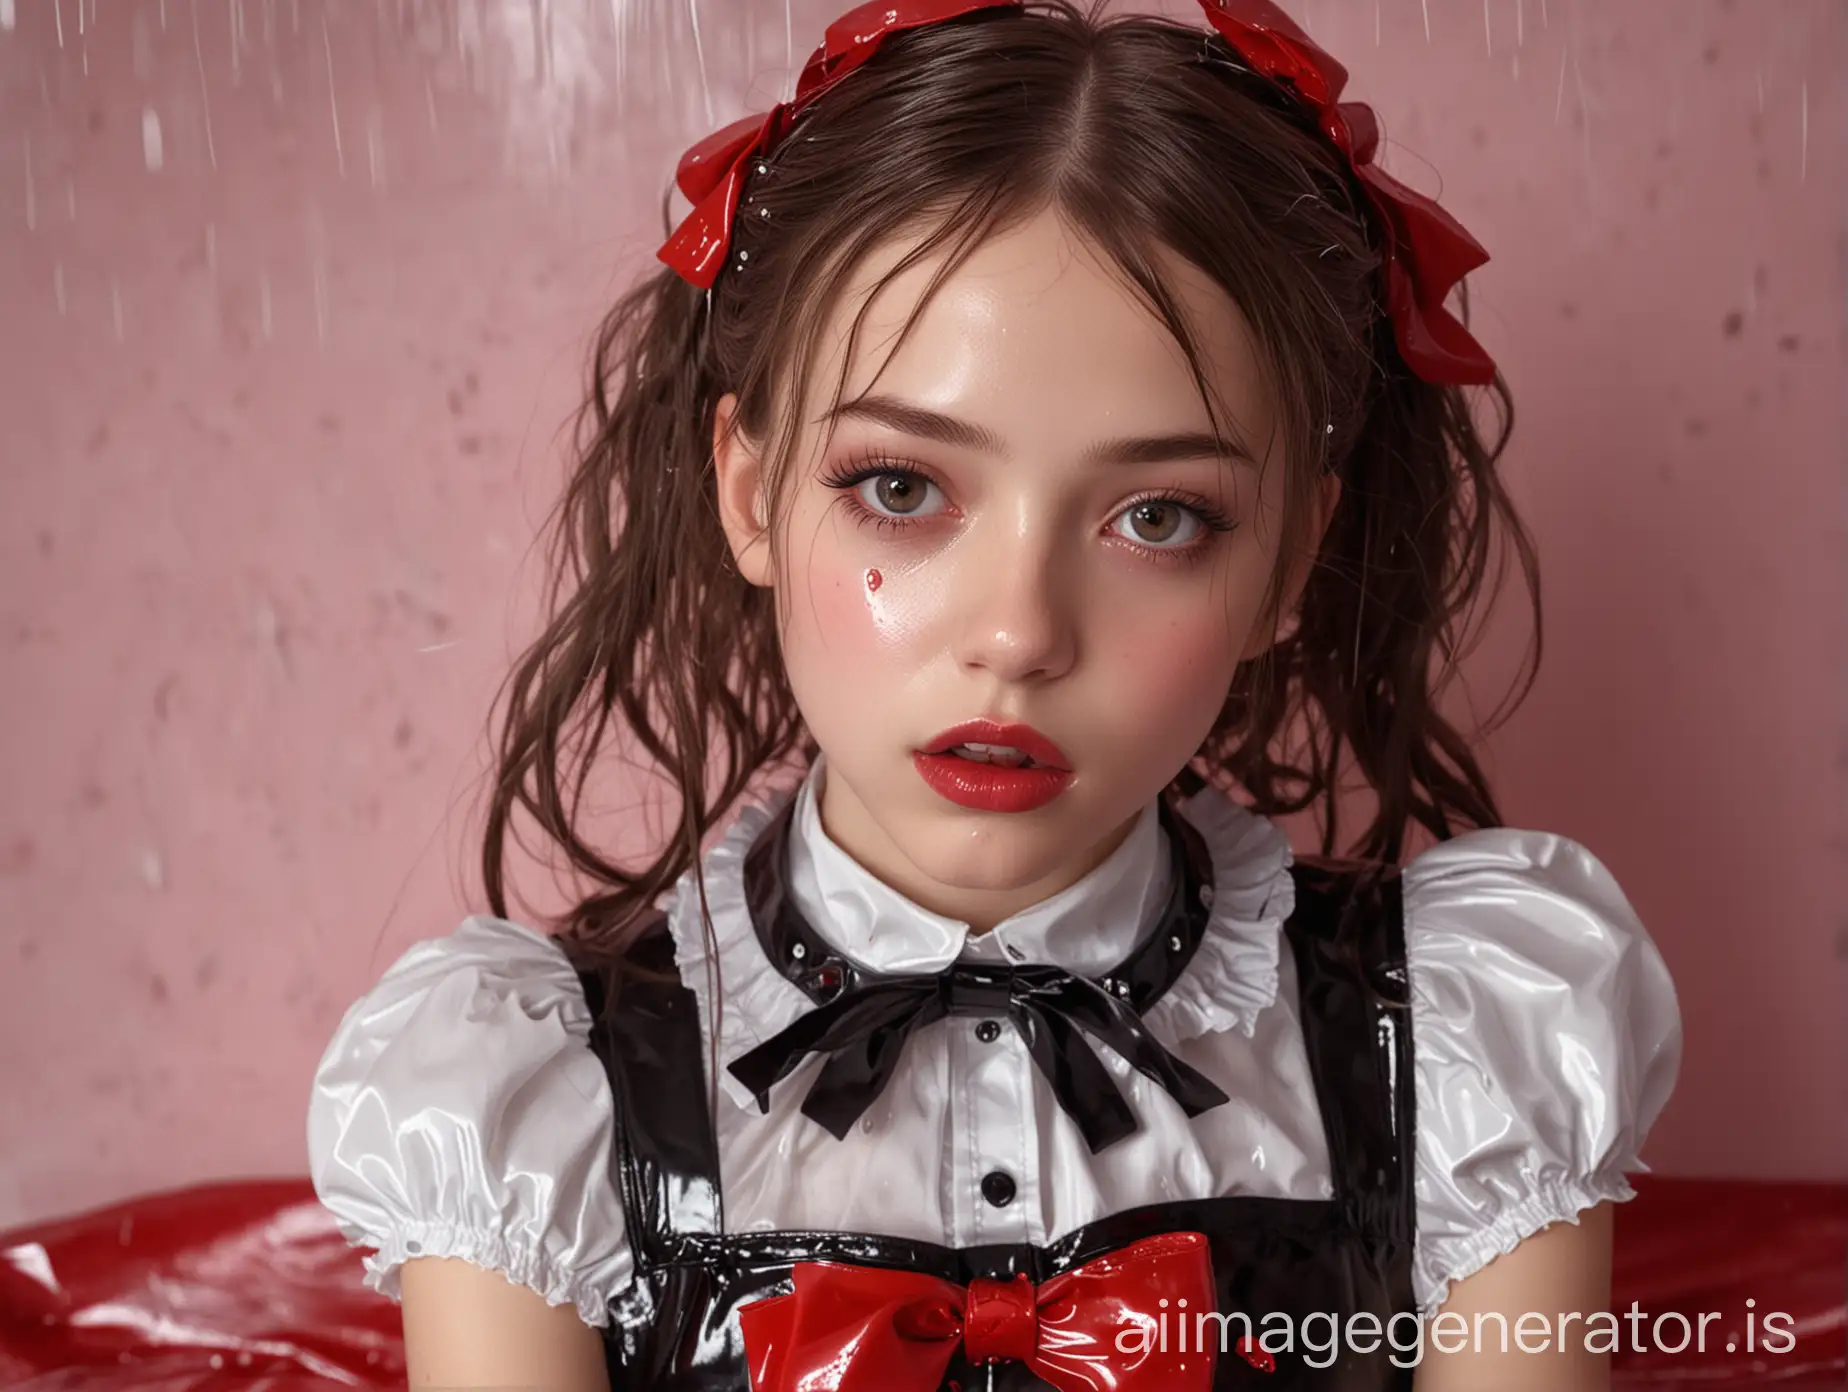 Hyperrealistic-French-Lolita-Girl-in-Shiny-Black-and-Red-Latex-Outfit-Under-Heavy-Rain